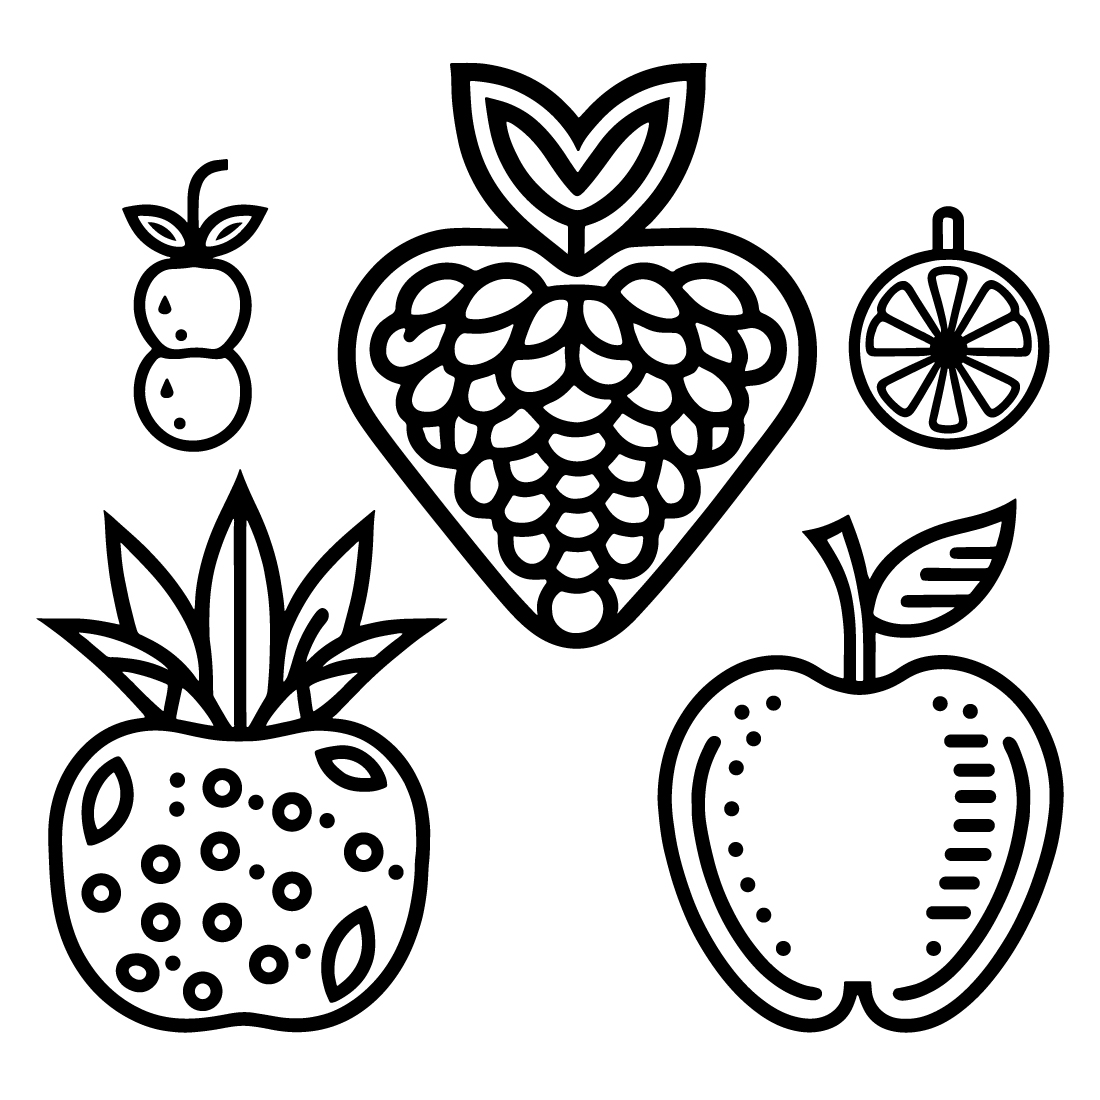 Fruit Icon set, cartoon fruits isolated on white background, Simple lineart outline elements collection, clean simple design preview image.